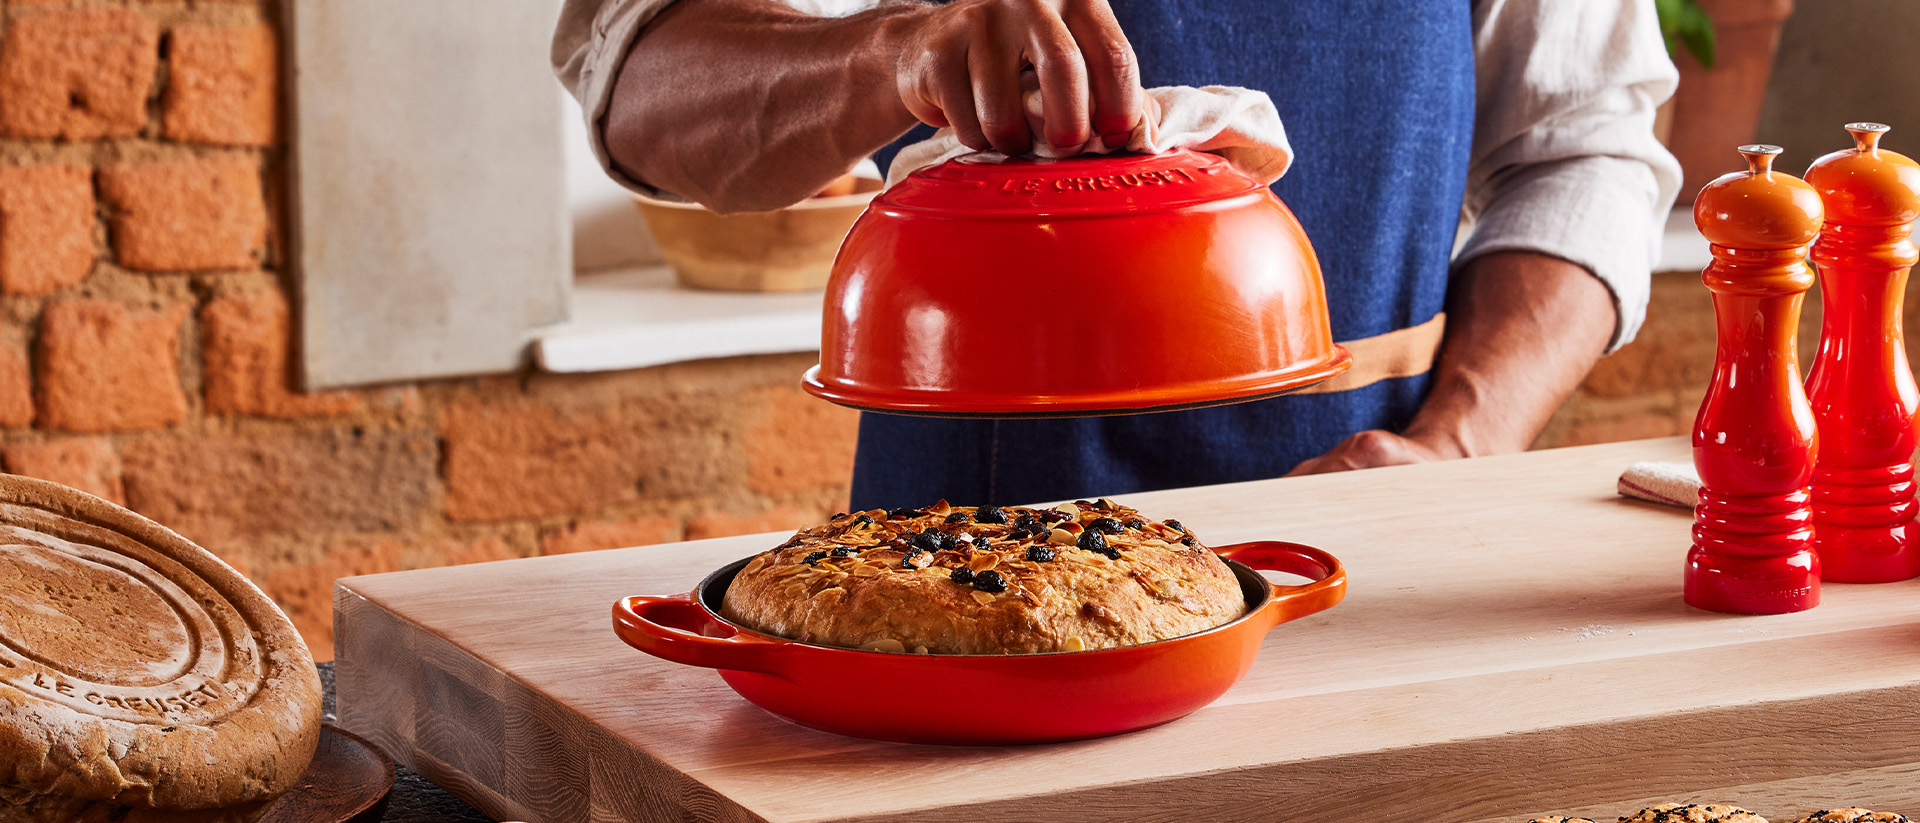 https://www.lecreuset.fi/on/demandware.static/-/Library-Sites-lc-sharedLibrary/default/dw0ad7eb2d/images/2023/H2/Evergreen/Bread%20Oven/2023_H2_BreadOvenPageAssets_1920x823_02.jpg